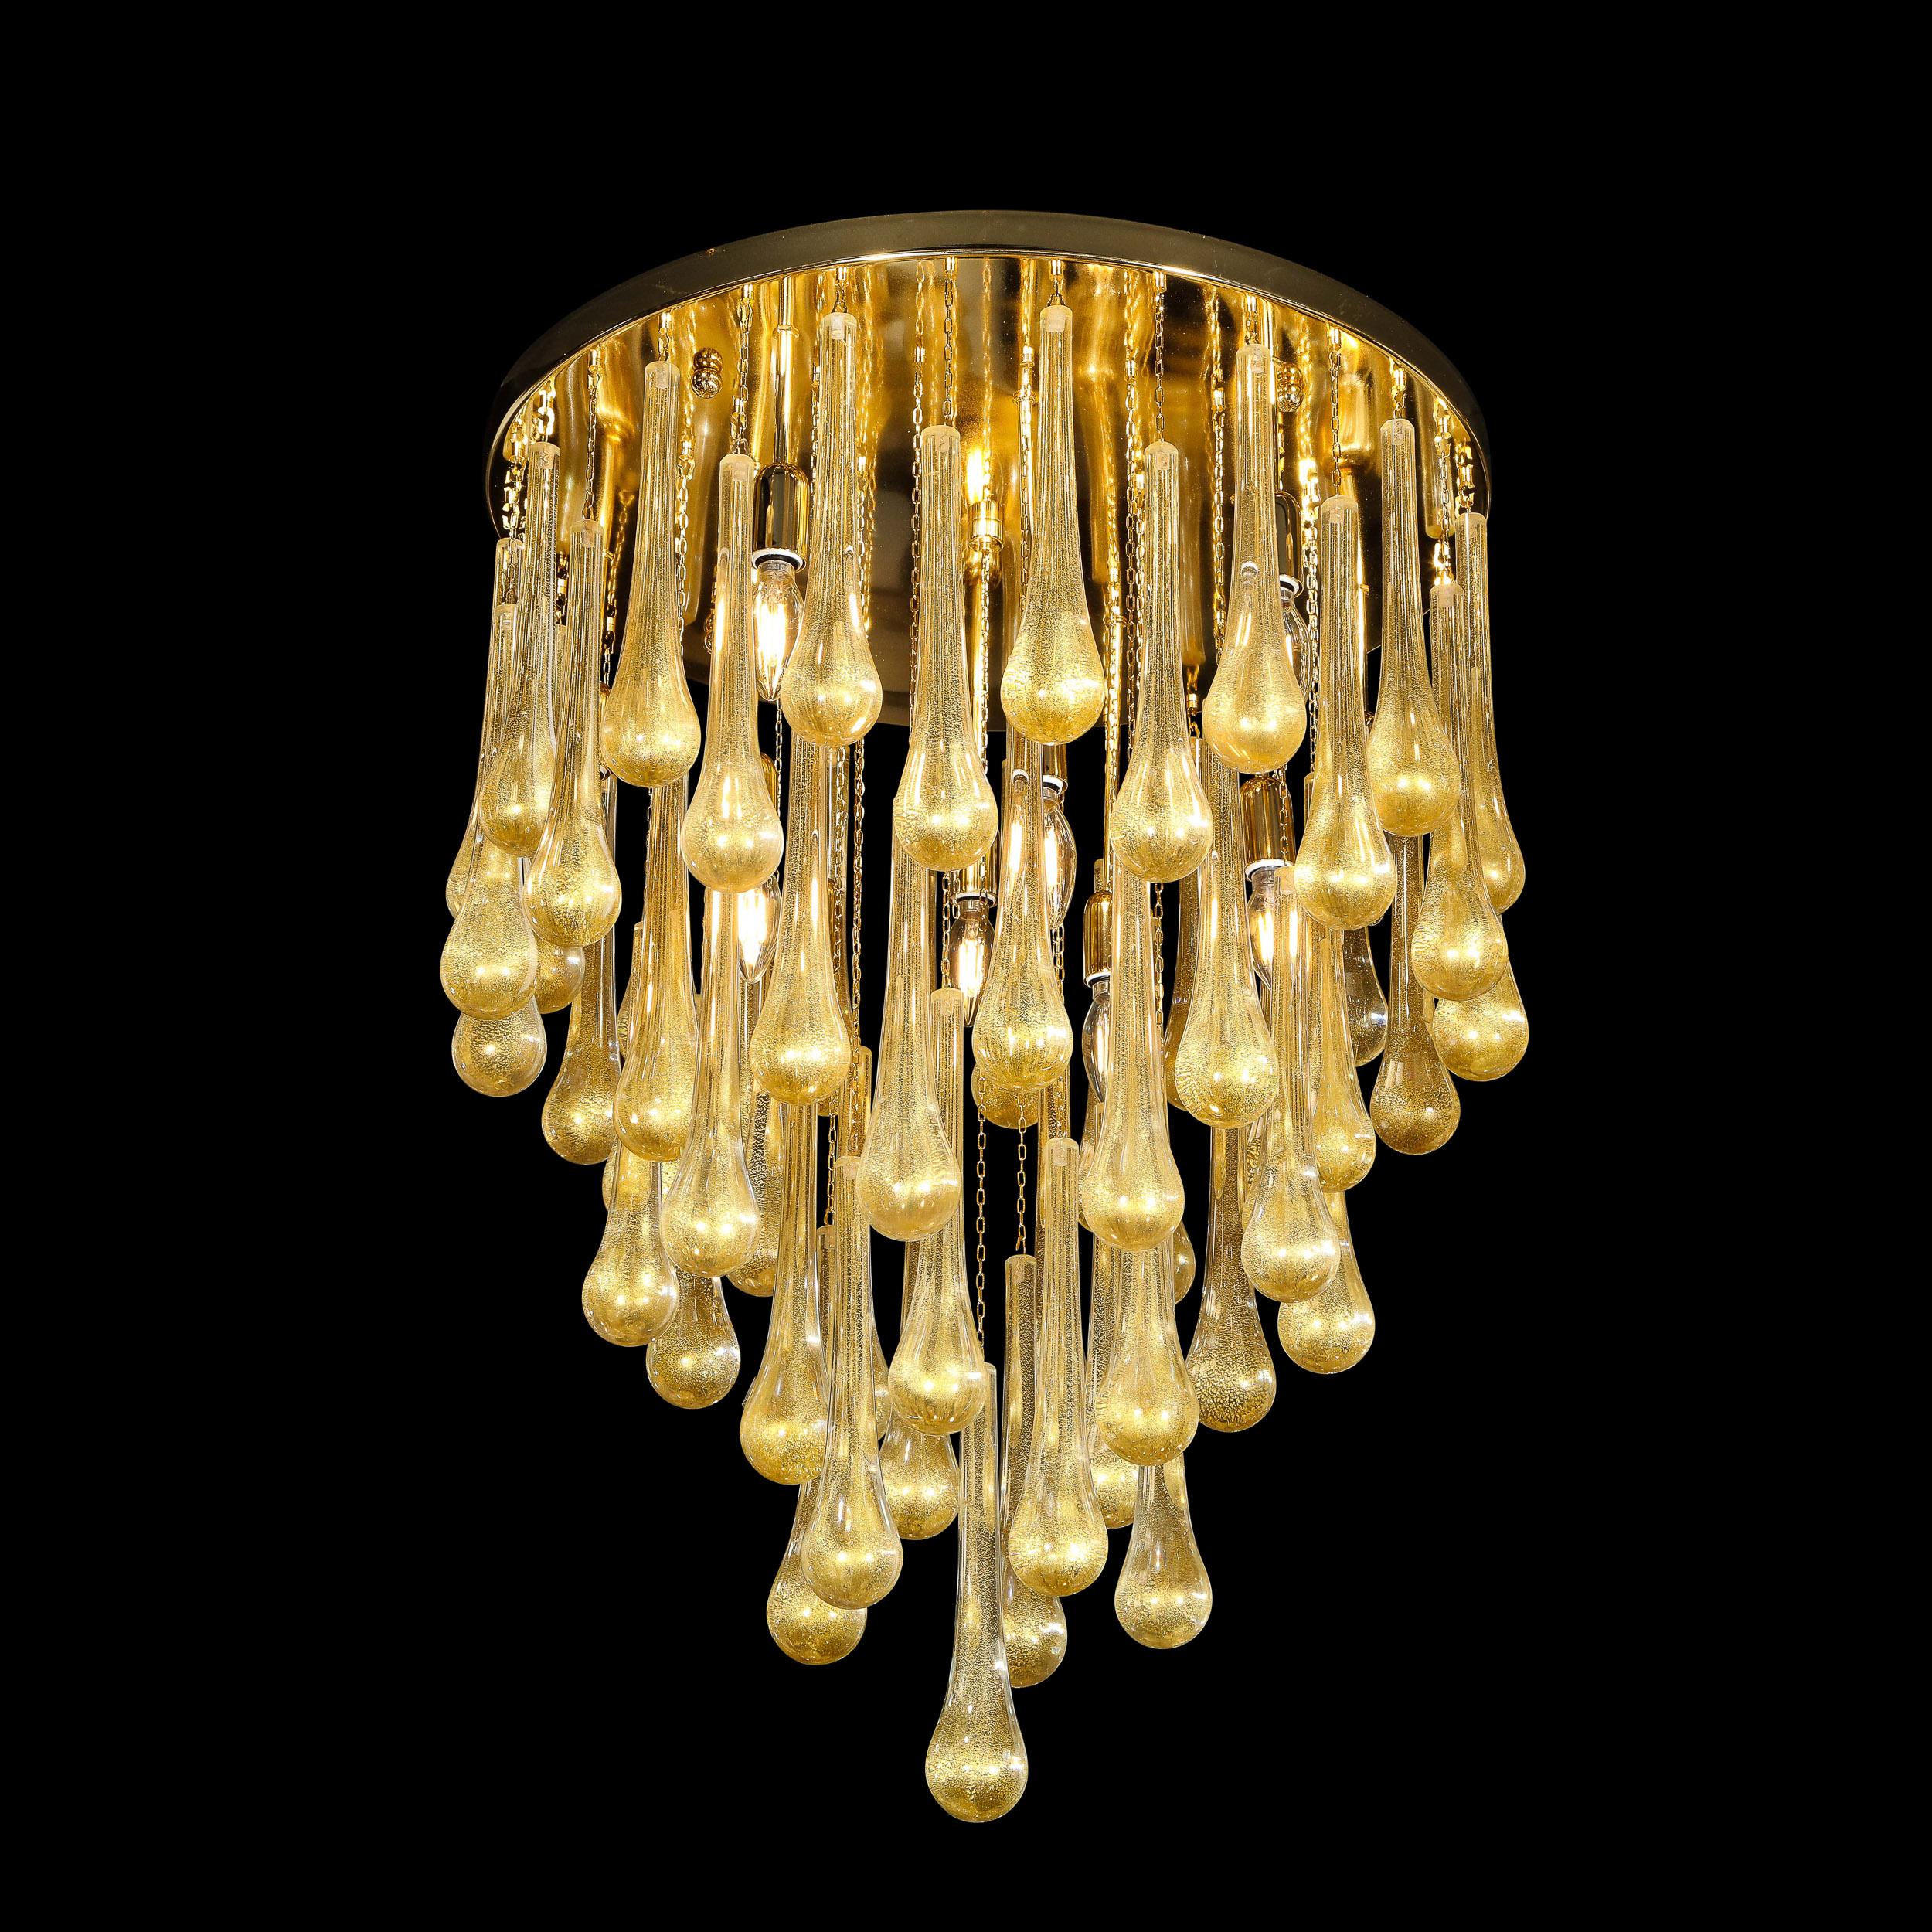 This stunning modernist teardrop flush mount chandelier was hand blown in Murano Italy- the island off the coast of Venice renowned for centuries for its superlative glass production. It features a circular polished brass canopy with a wealth of